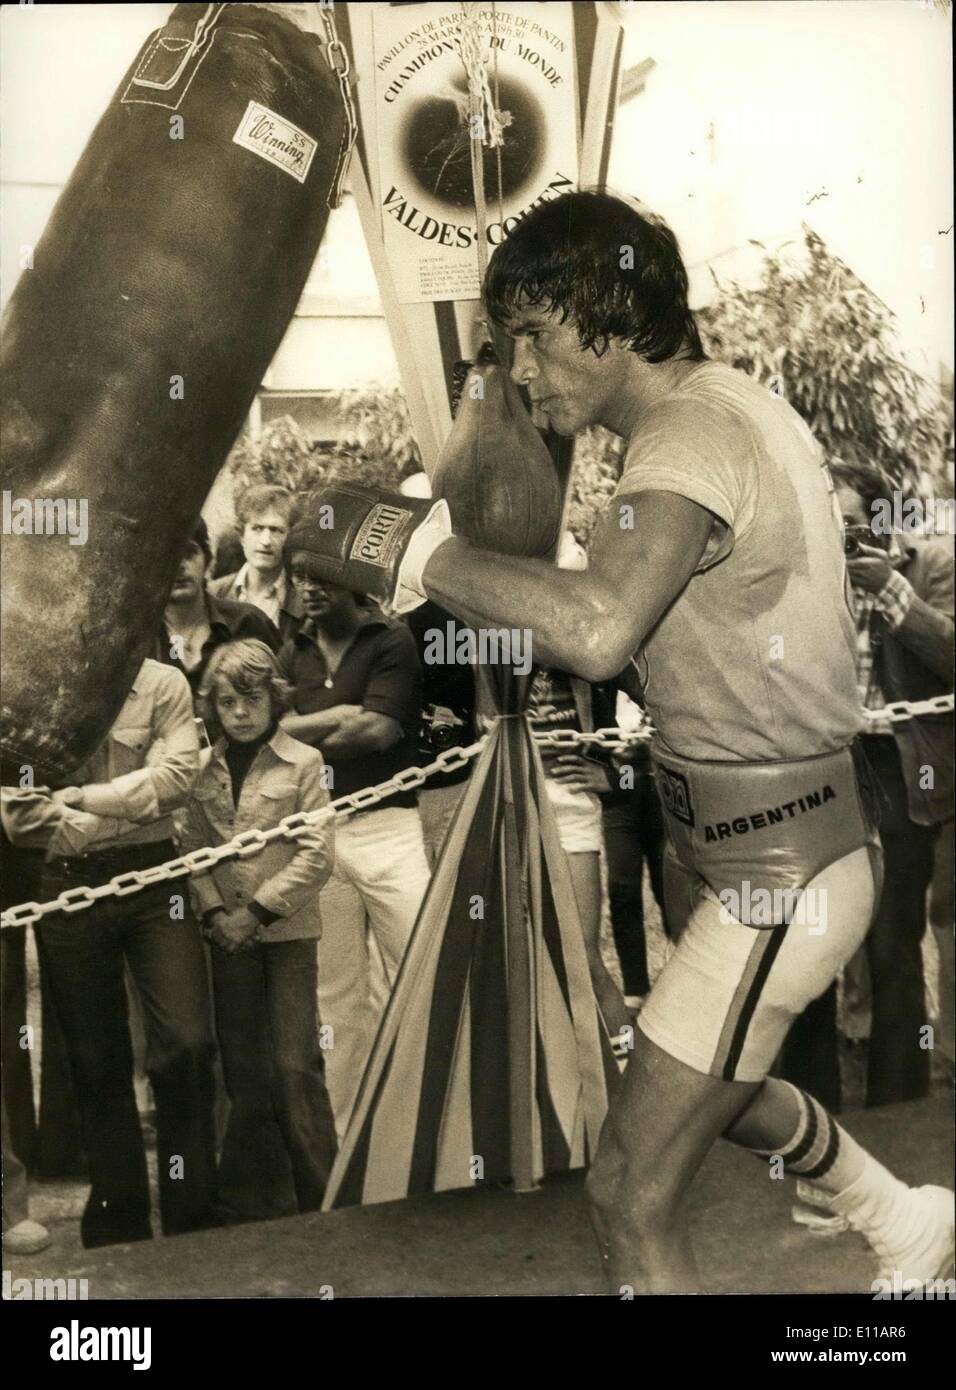 Jun. 17, 1976 - The Argentinian boxing champion Carlos Monzon is training in Paris in light of the Lightweight Boxing Championships in which he will be fighting Colombian Rodrigo Valdes on June 26th in Monte-Carlo. Picture: Carlos Monzon training. Stock Photo